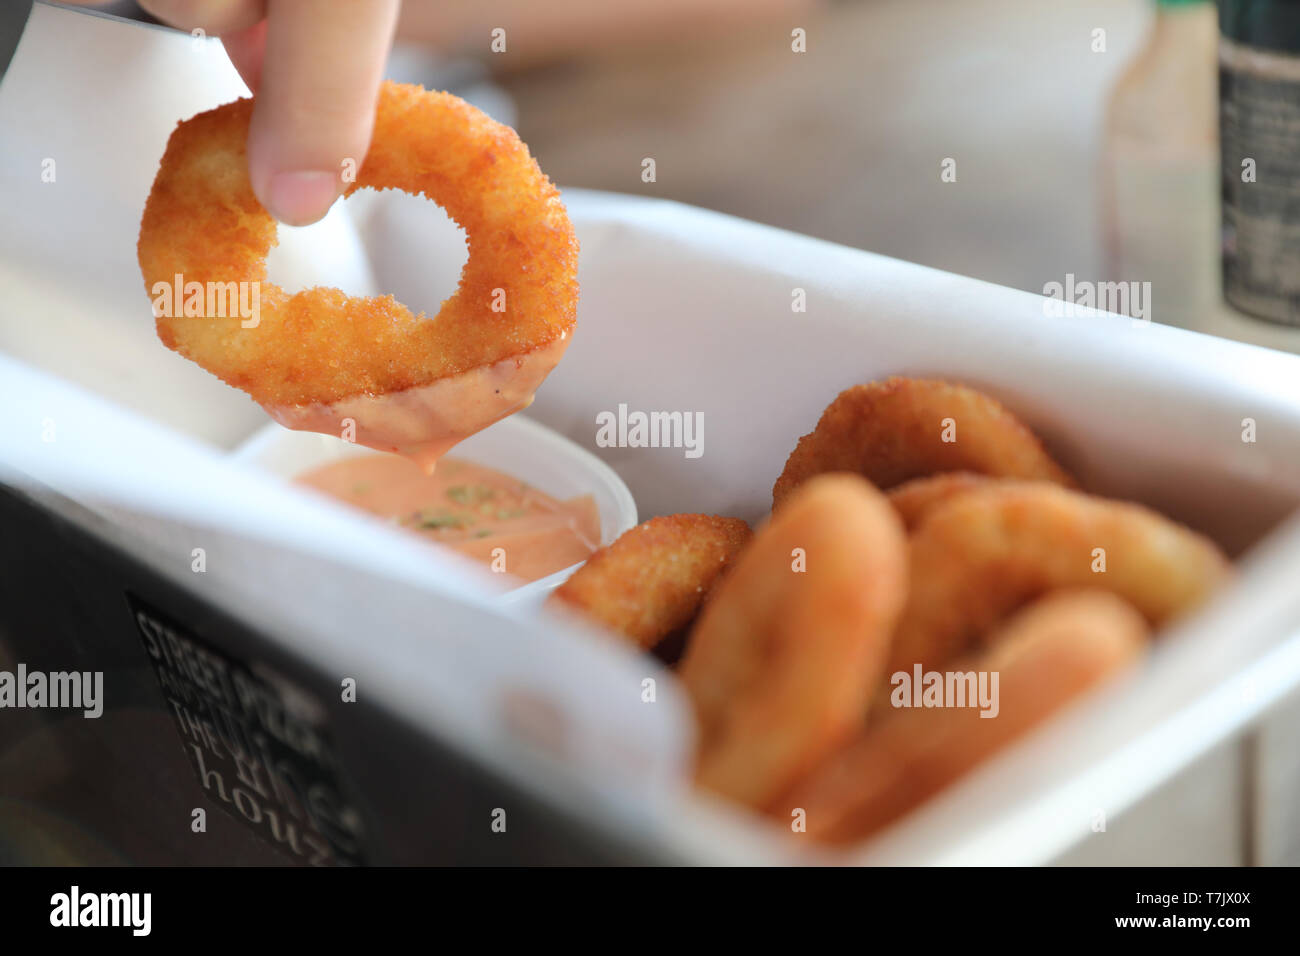 Onion rings with sauce on wooden table Stock Photo